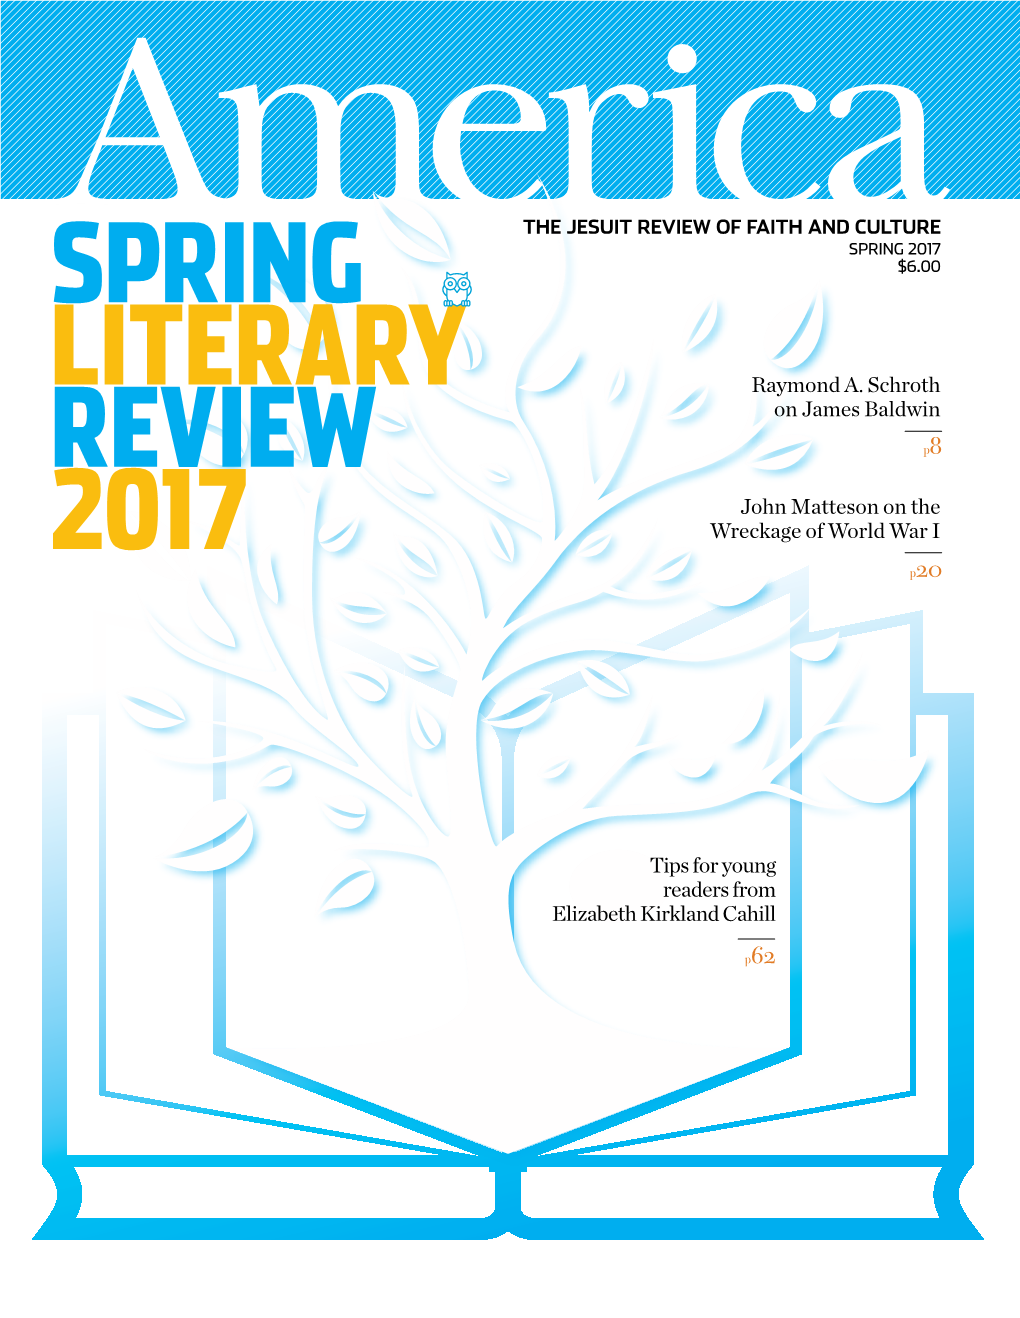 Spring Literary Review 2017